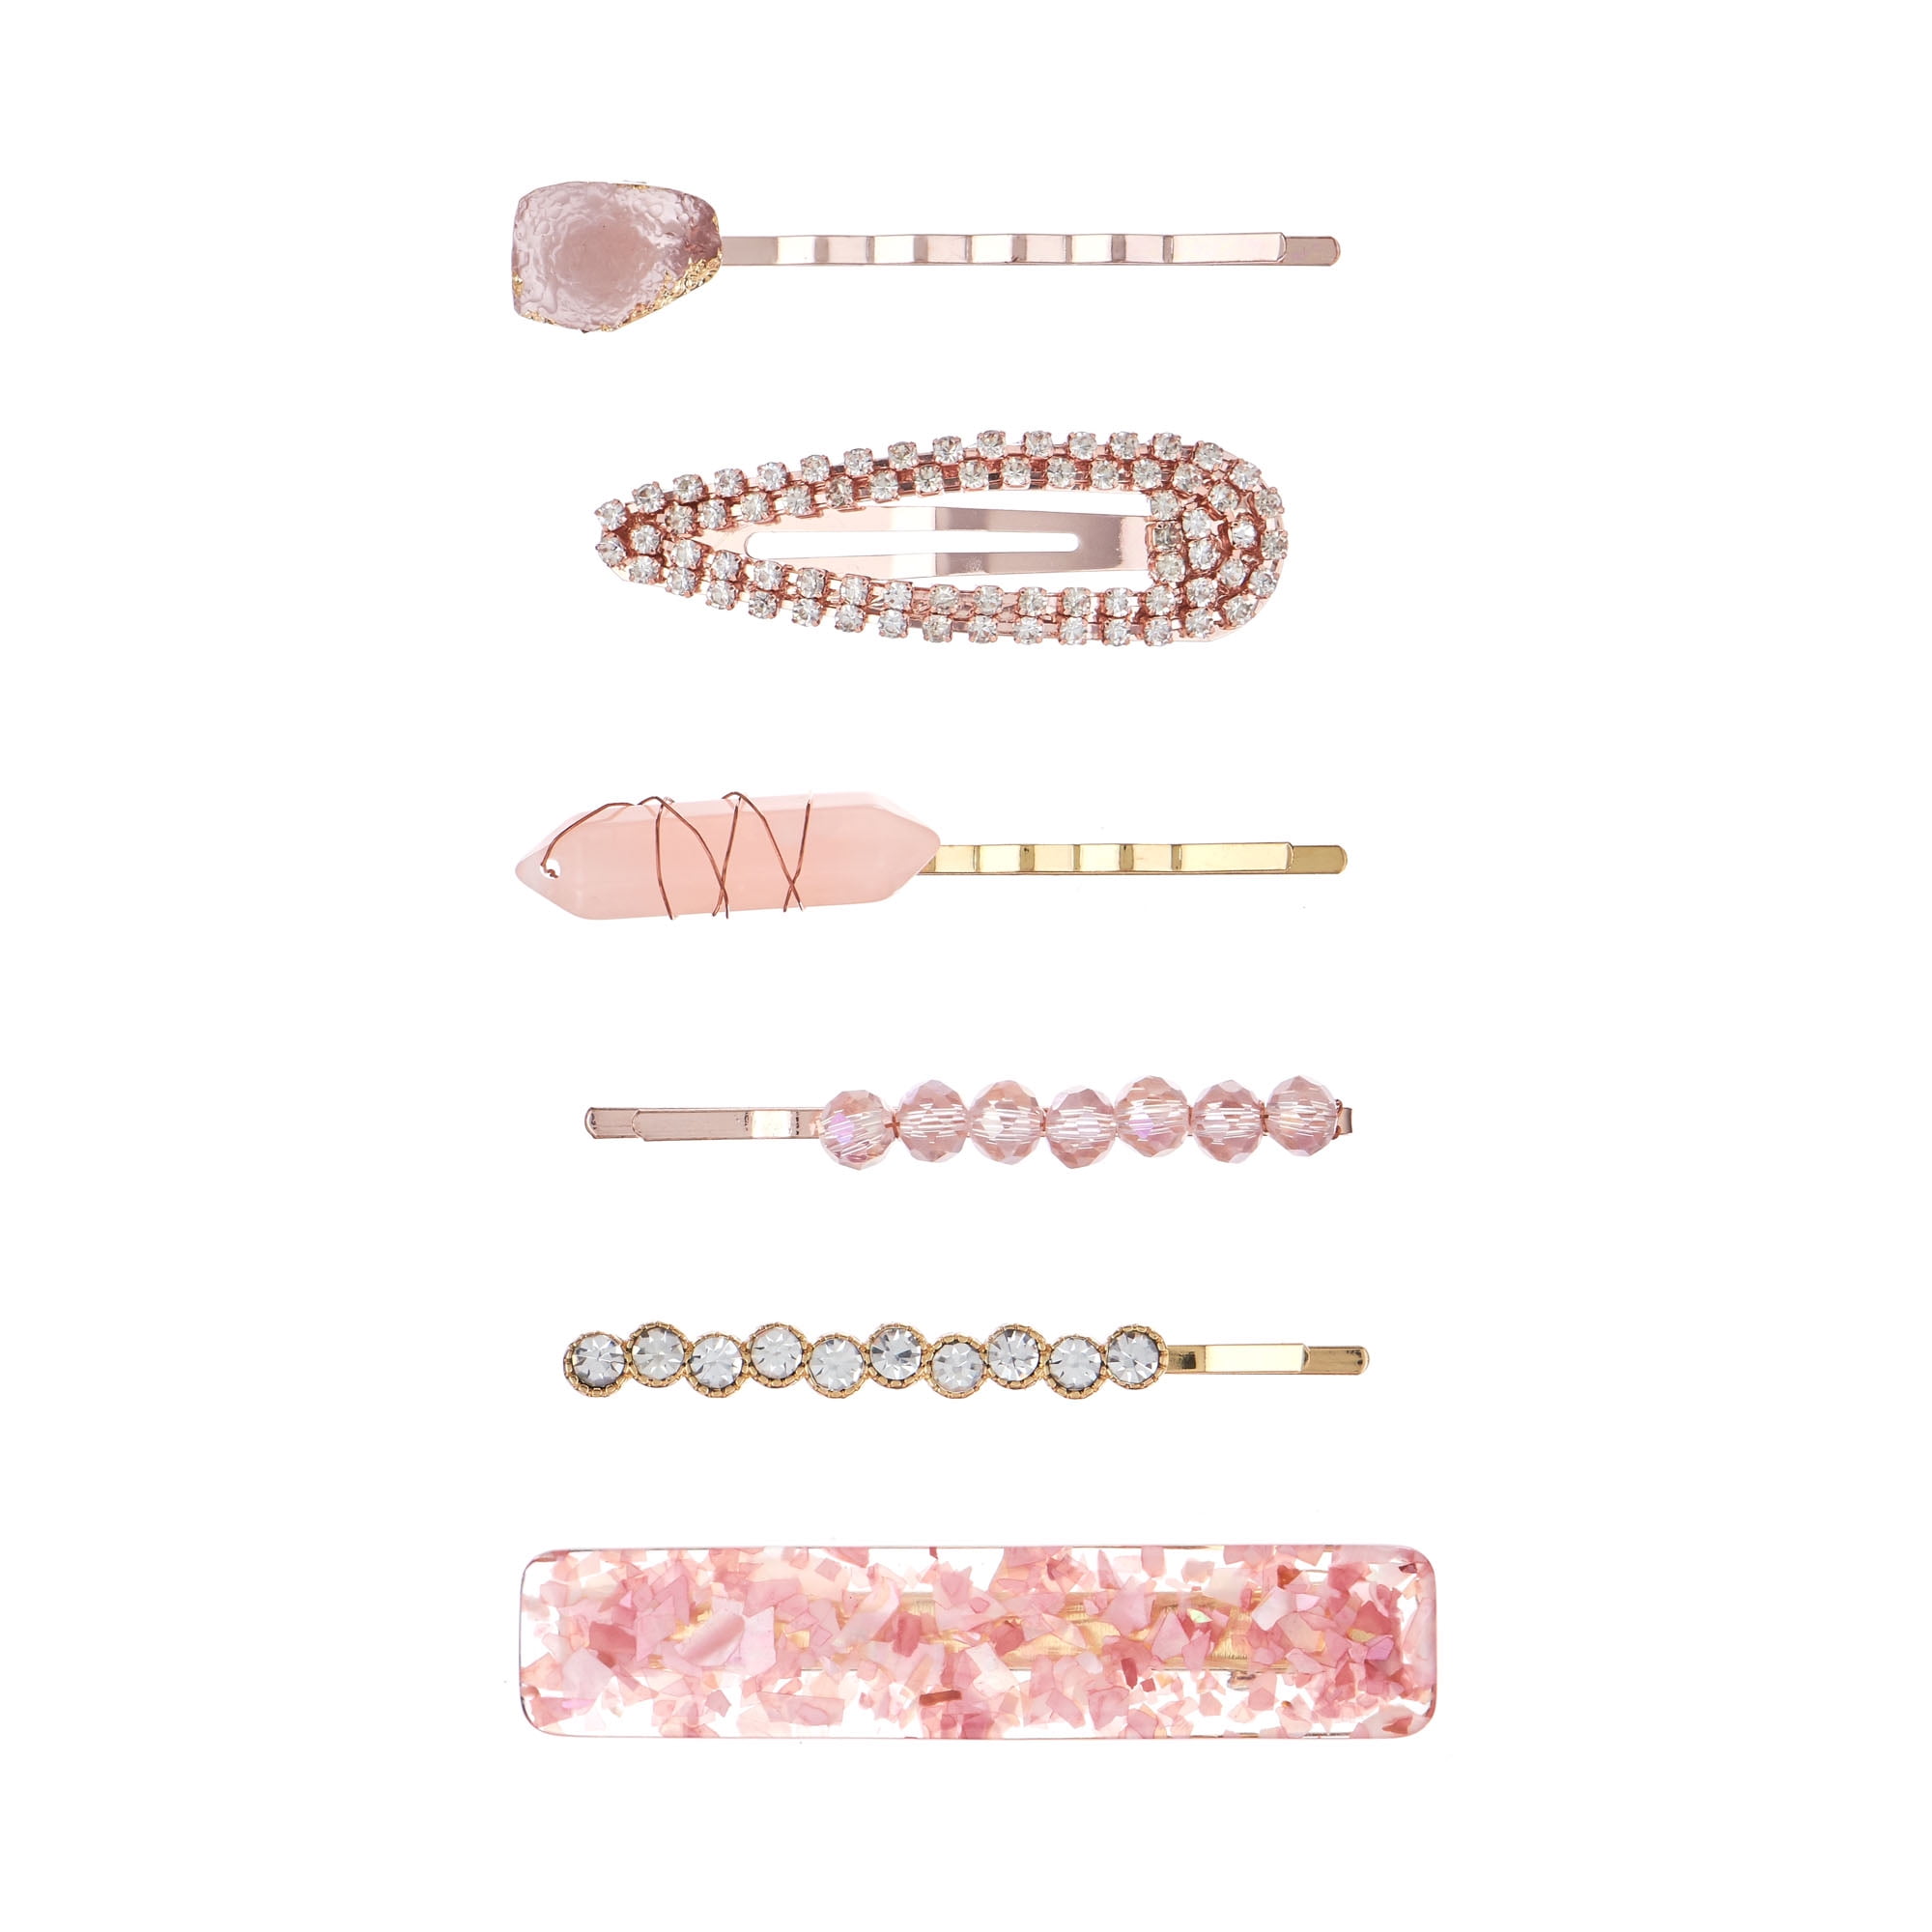 Shop Jewellery, Accessories, Hair, Beauty & More